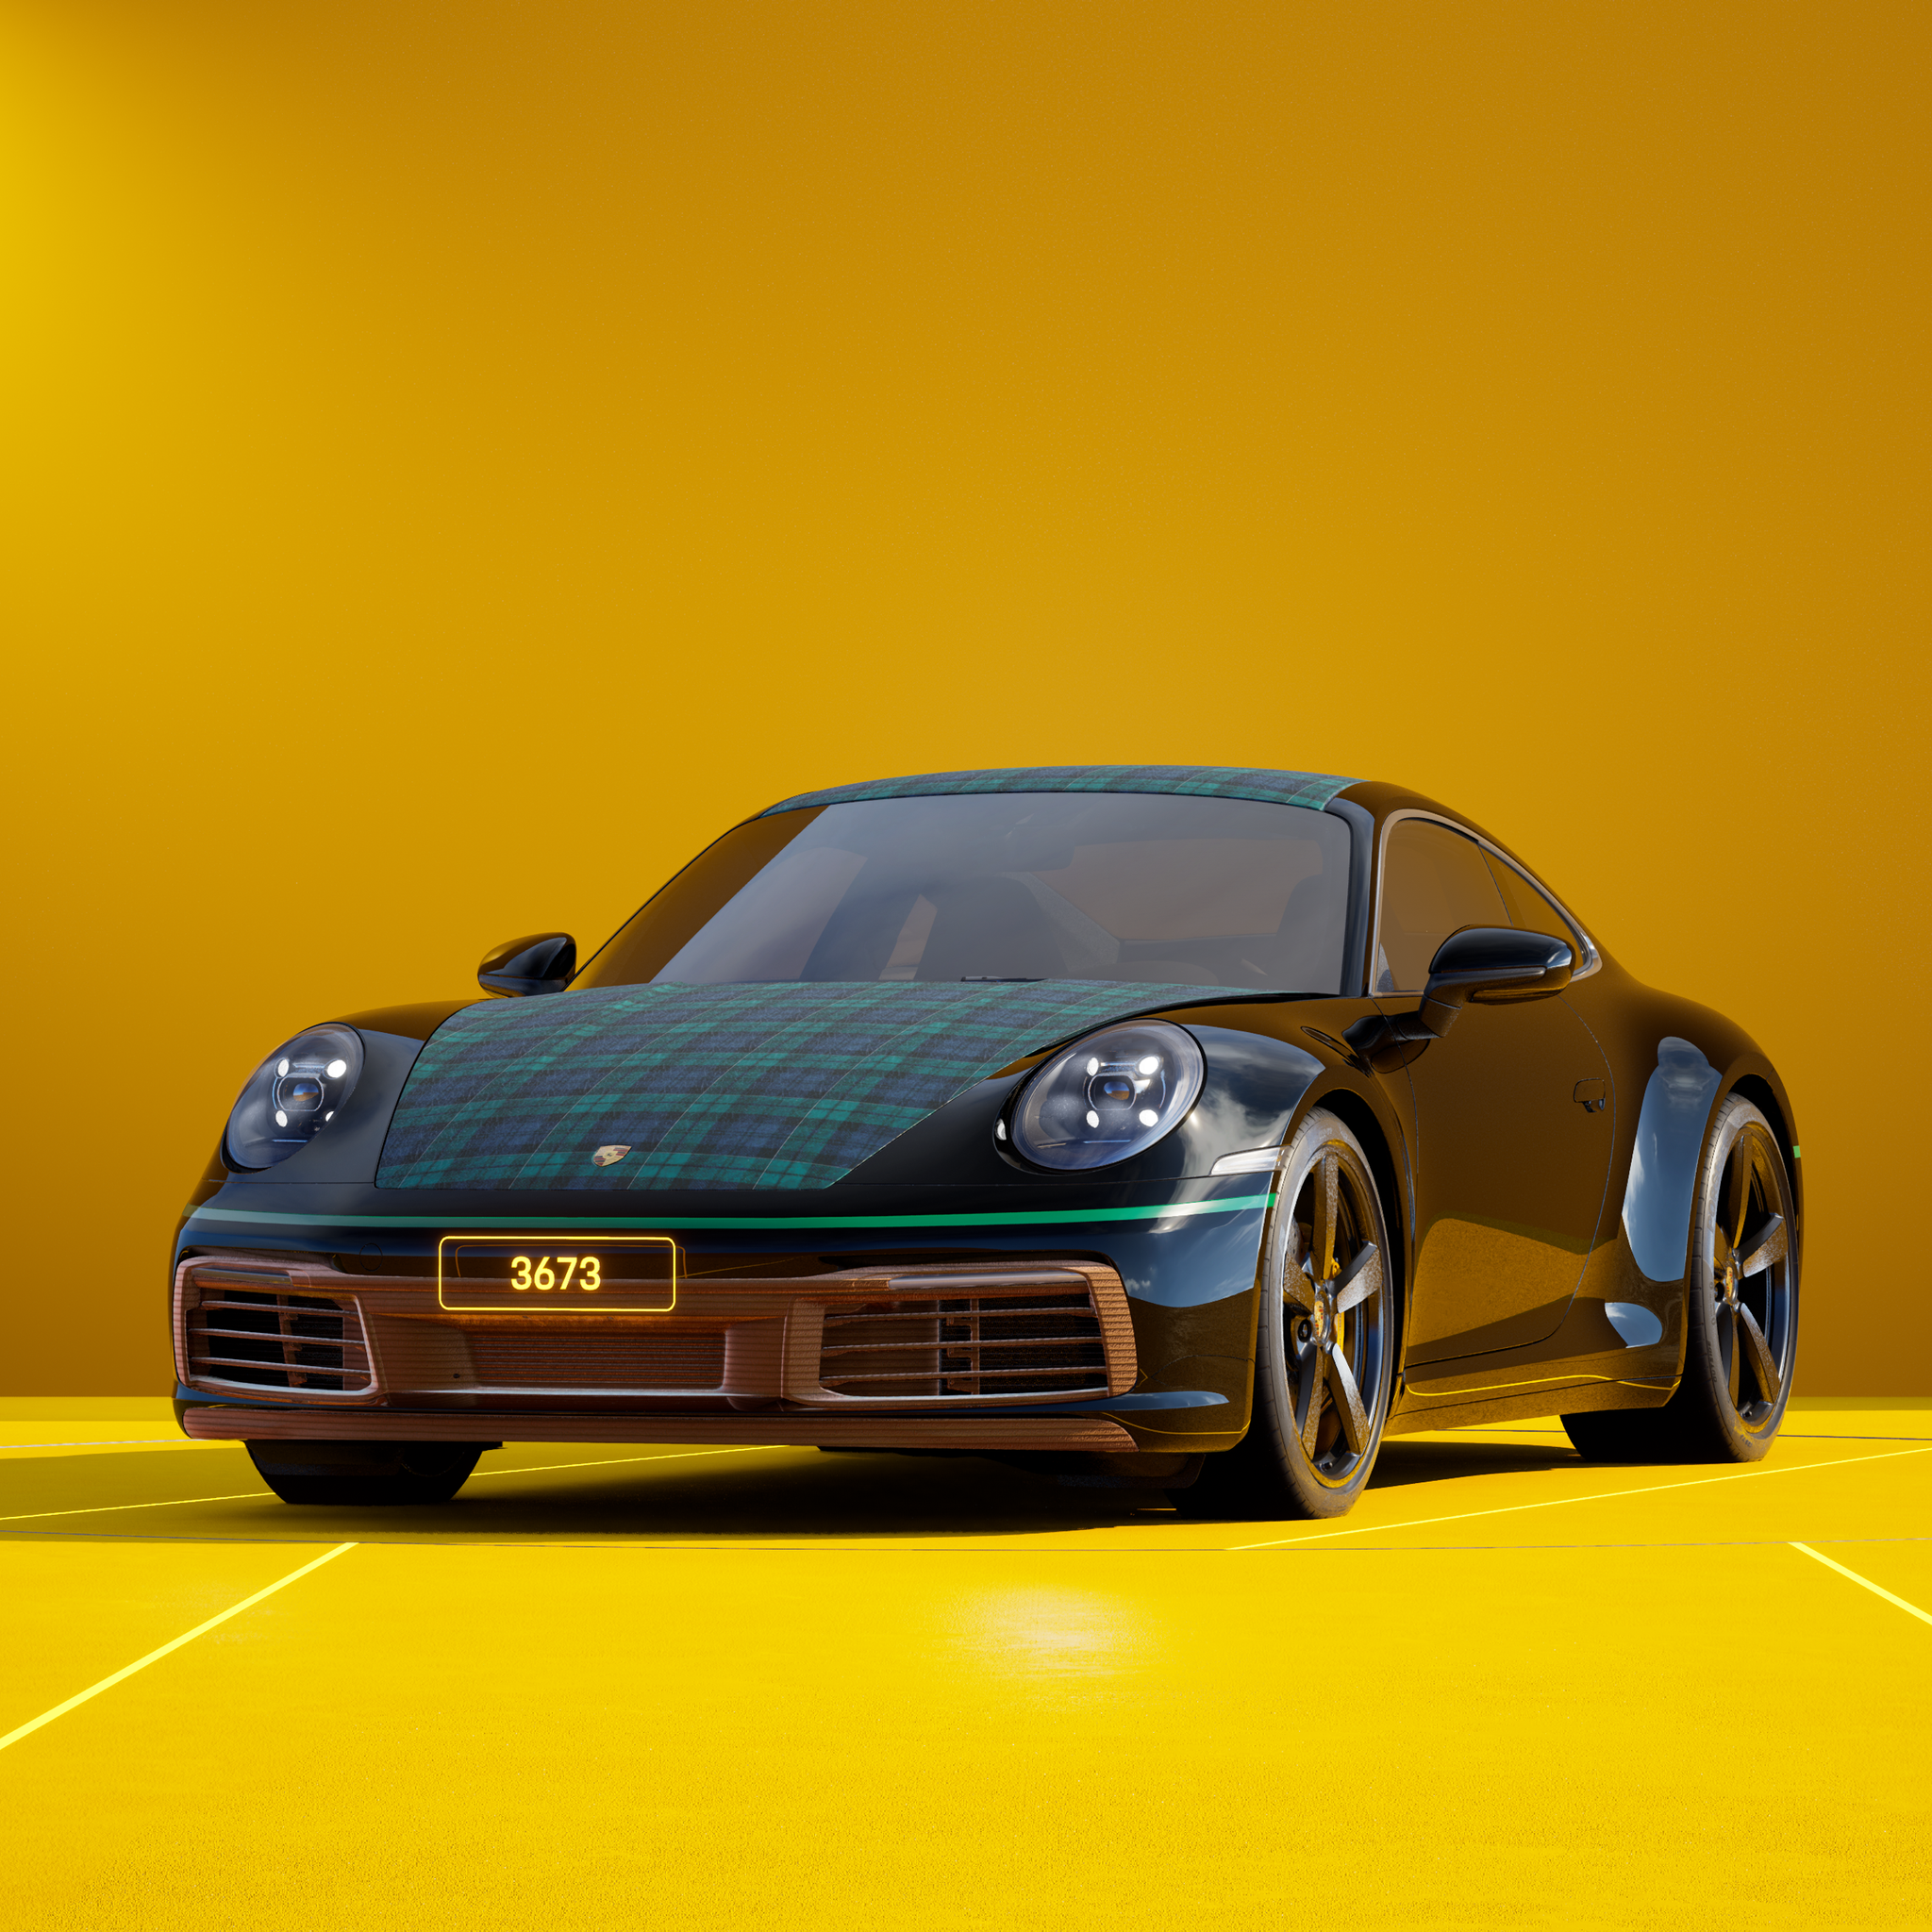 The PORSCHΞ 911 3673 image in phase